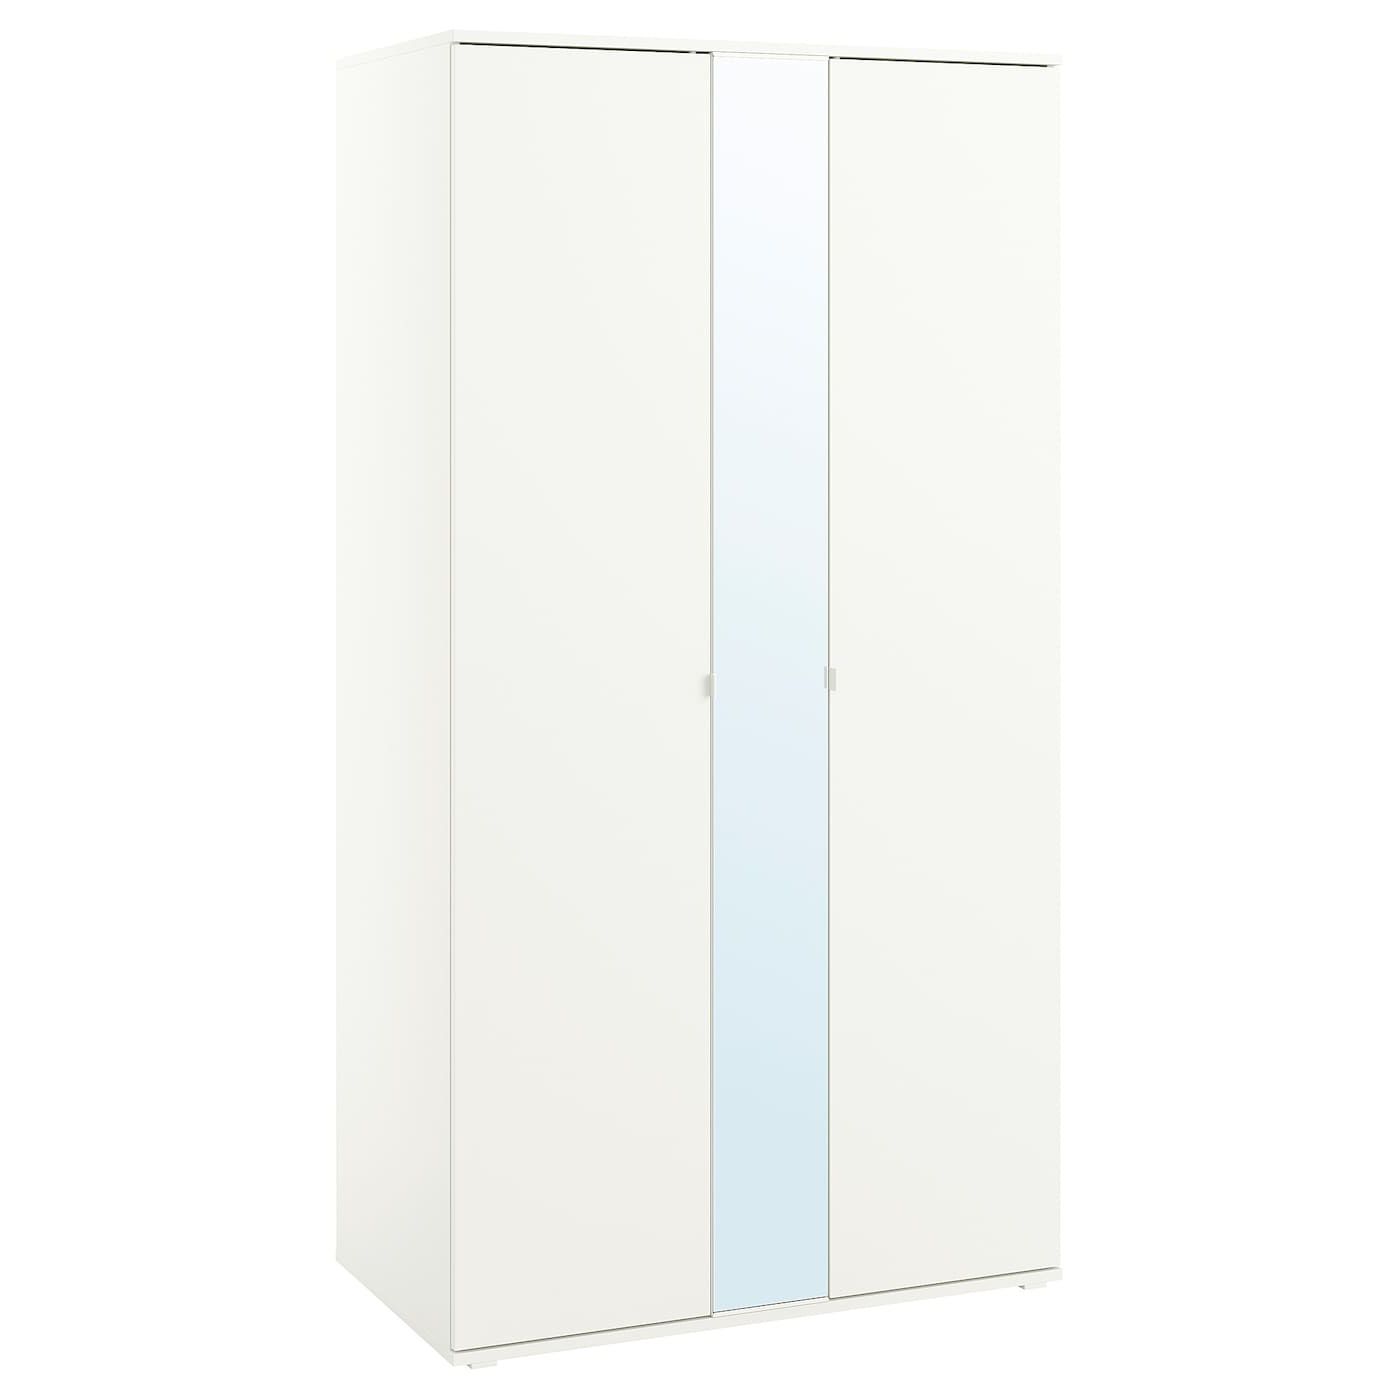 Vihals Wardrobe With 2 Doors, White, 413/8x221/2x783/4" – Ikea Within Two Door White Wardrobes (View 7 of 20)